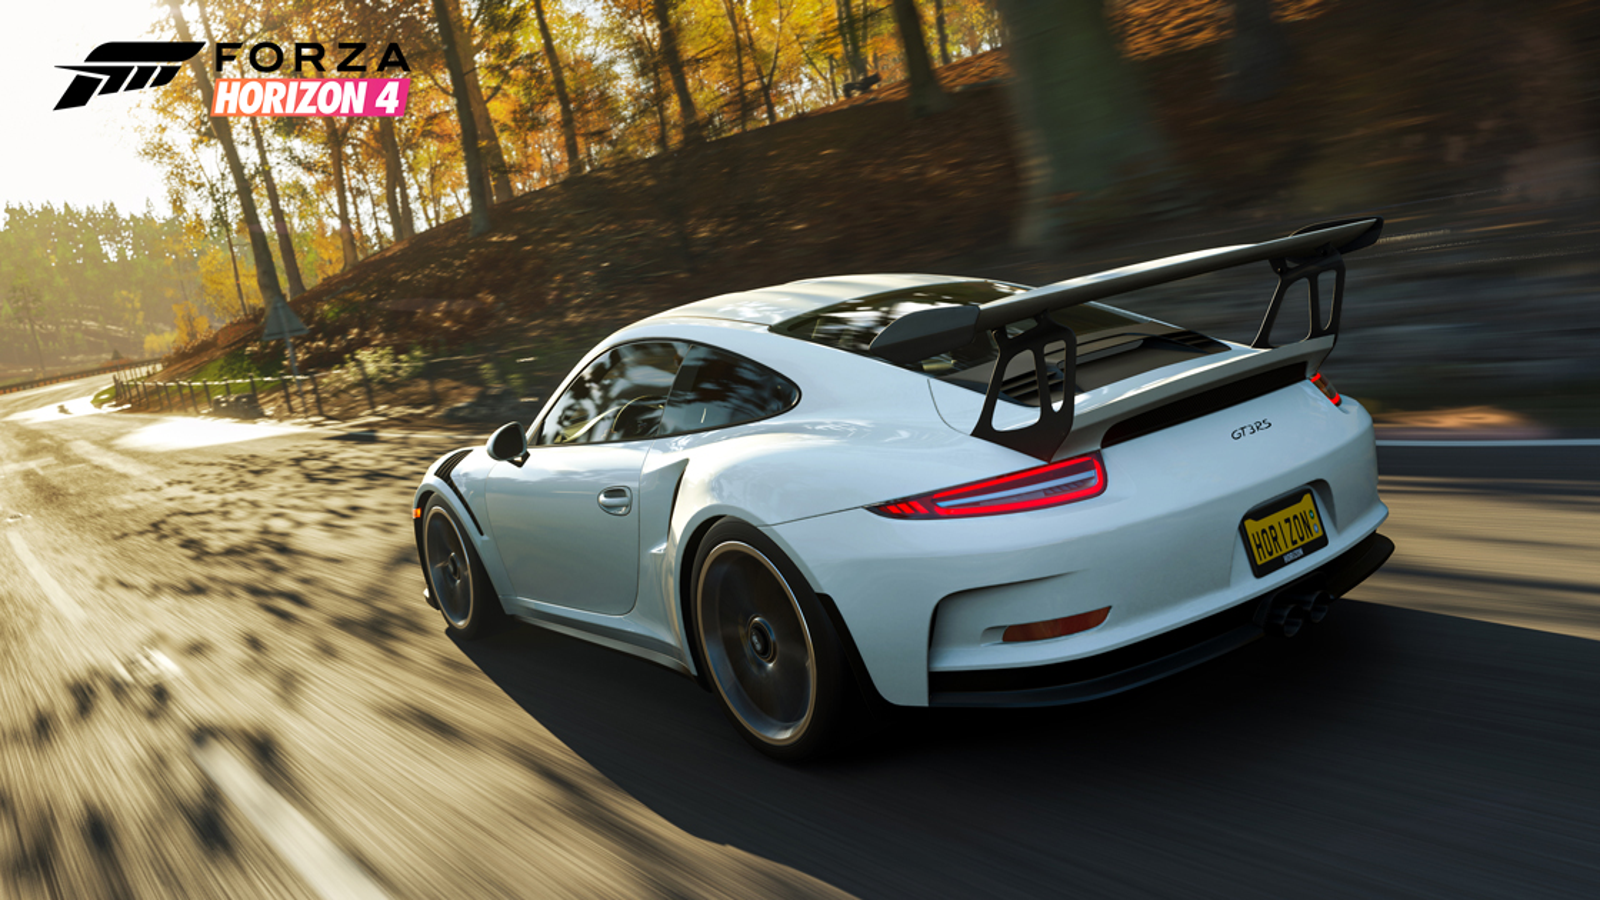 Forza Horizon 4 is coming to Steam, with crossplay enabled from day 1